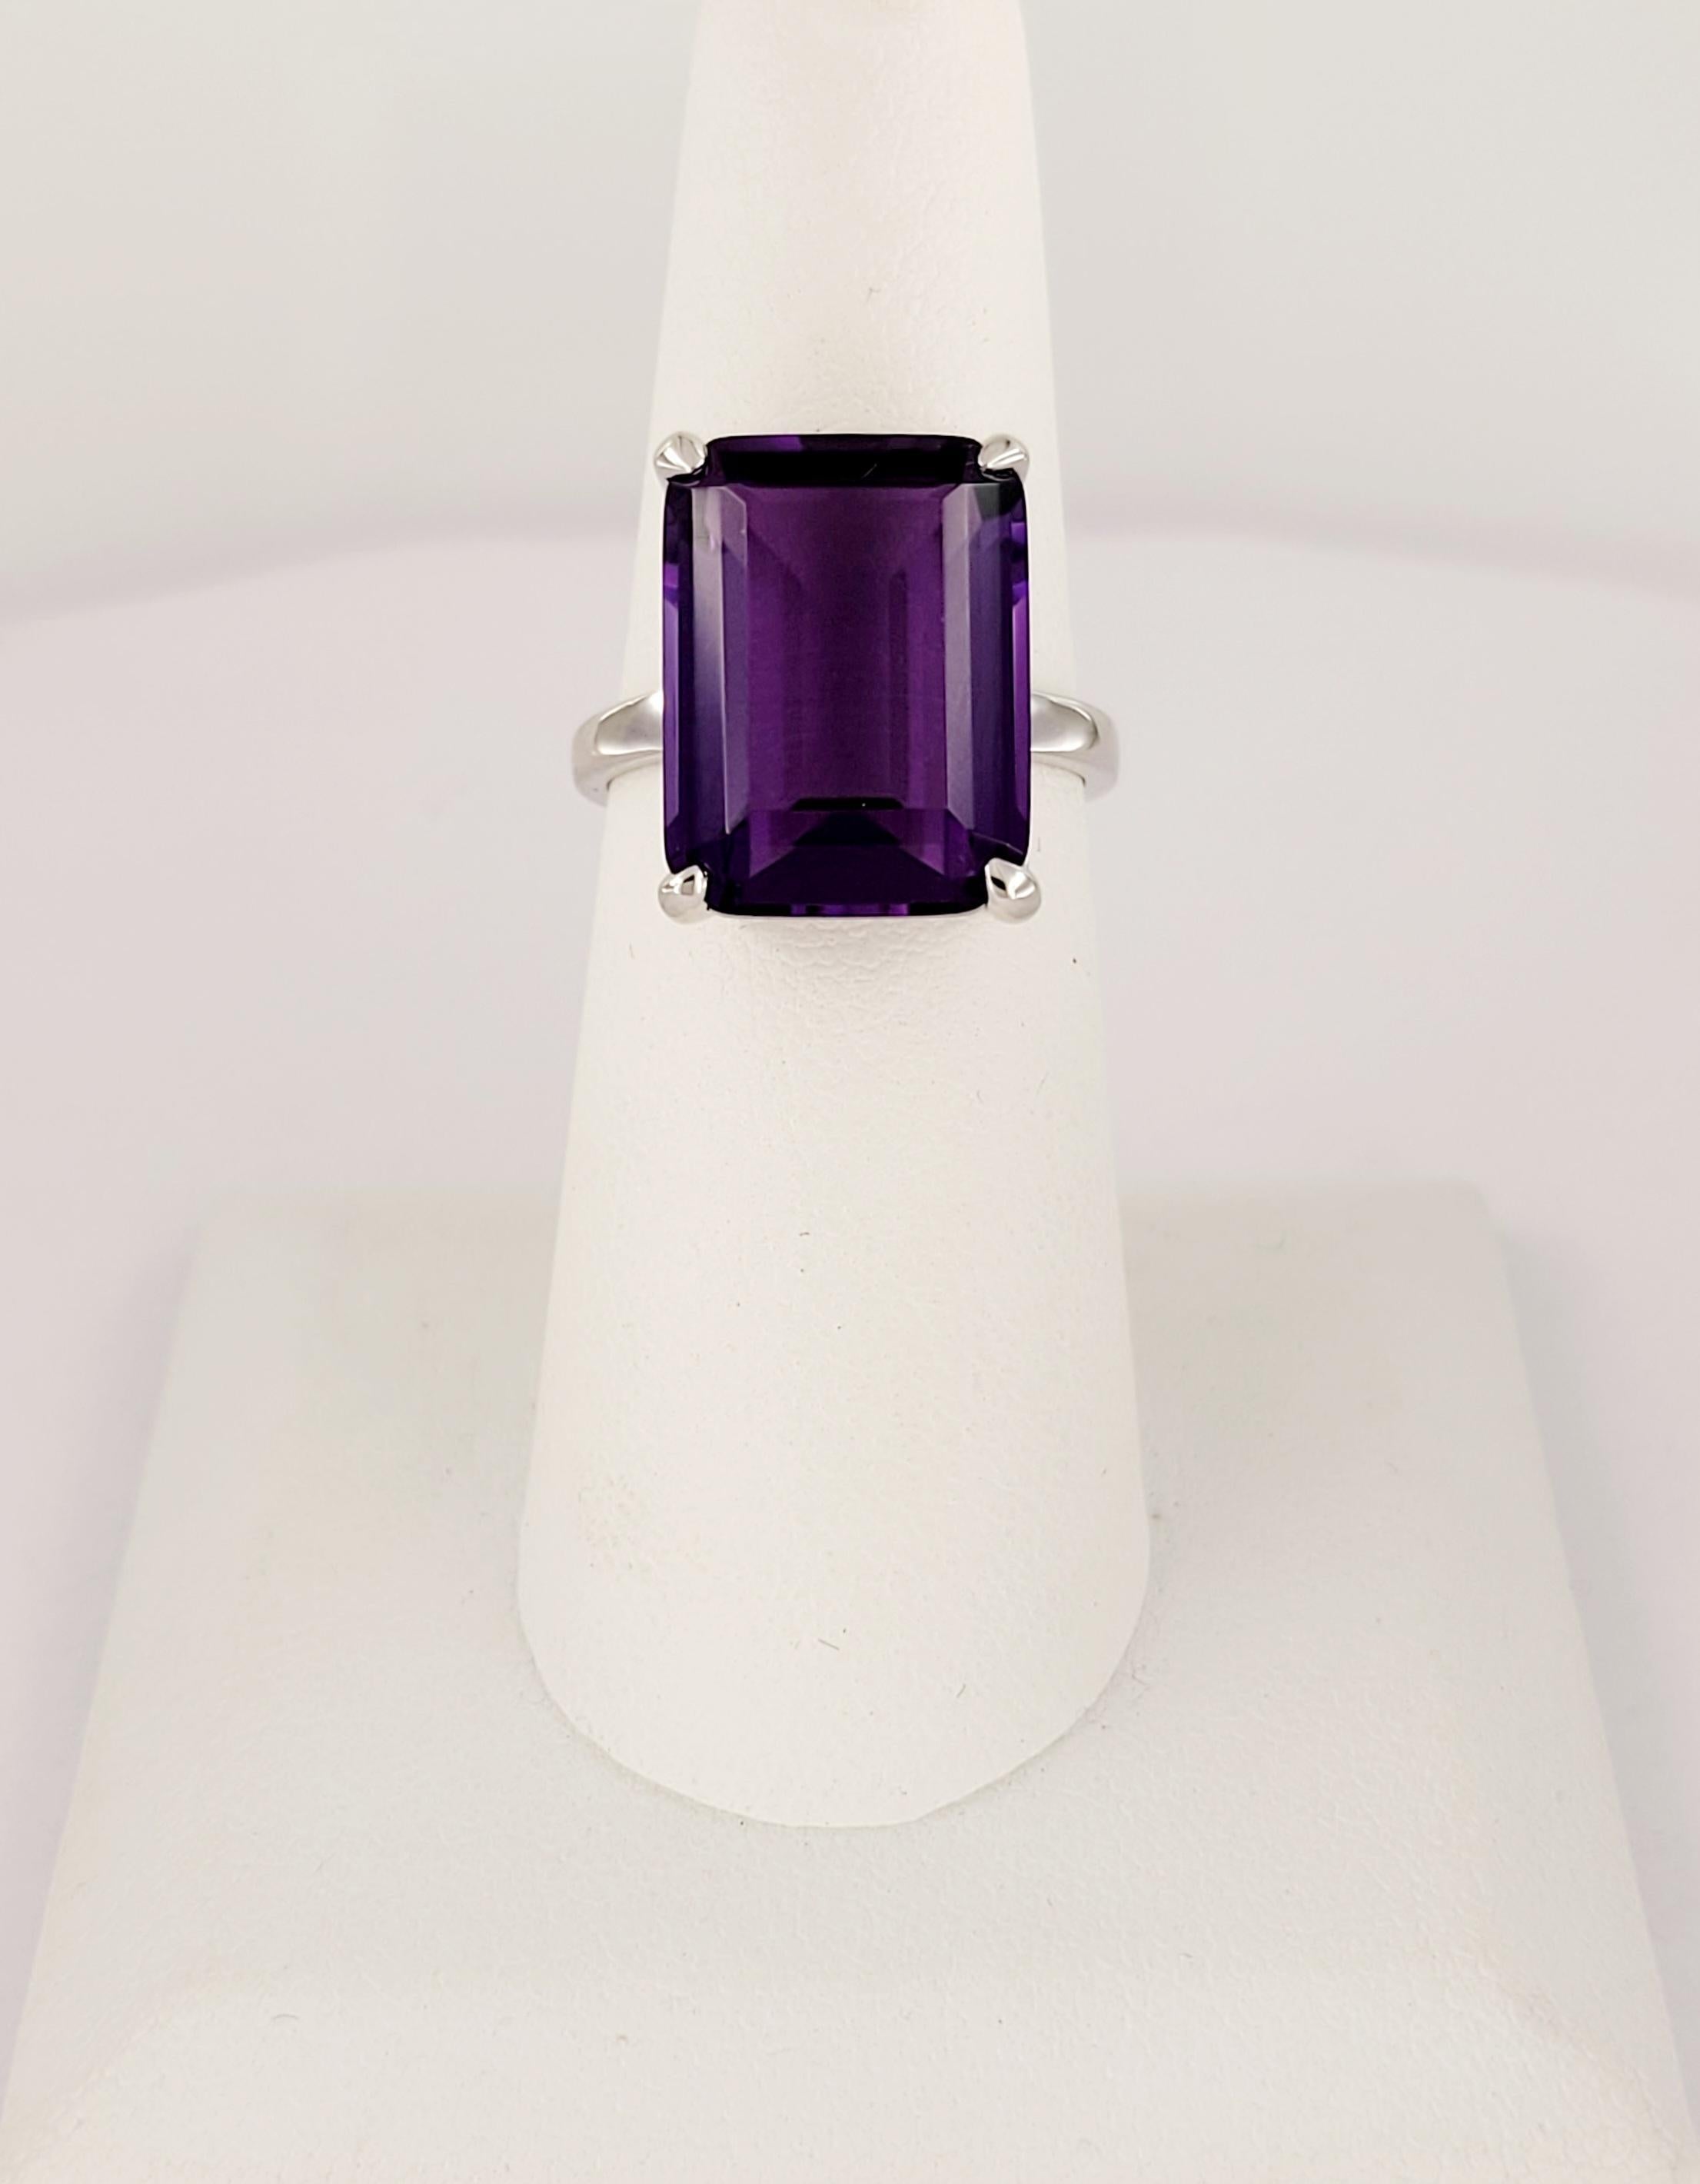 Tiffany& Co Sparkler Amethyst Gemstone
Emerald cut Amethyst 
Stone Color Purple 
Amethyst Dimension 16 X 12mm
Ring Size 6.75
Ring Weight 5gr
Condition new, never worn
Tiffany& Co Pouch included
Retail Price $1.250